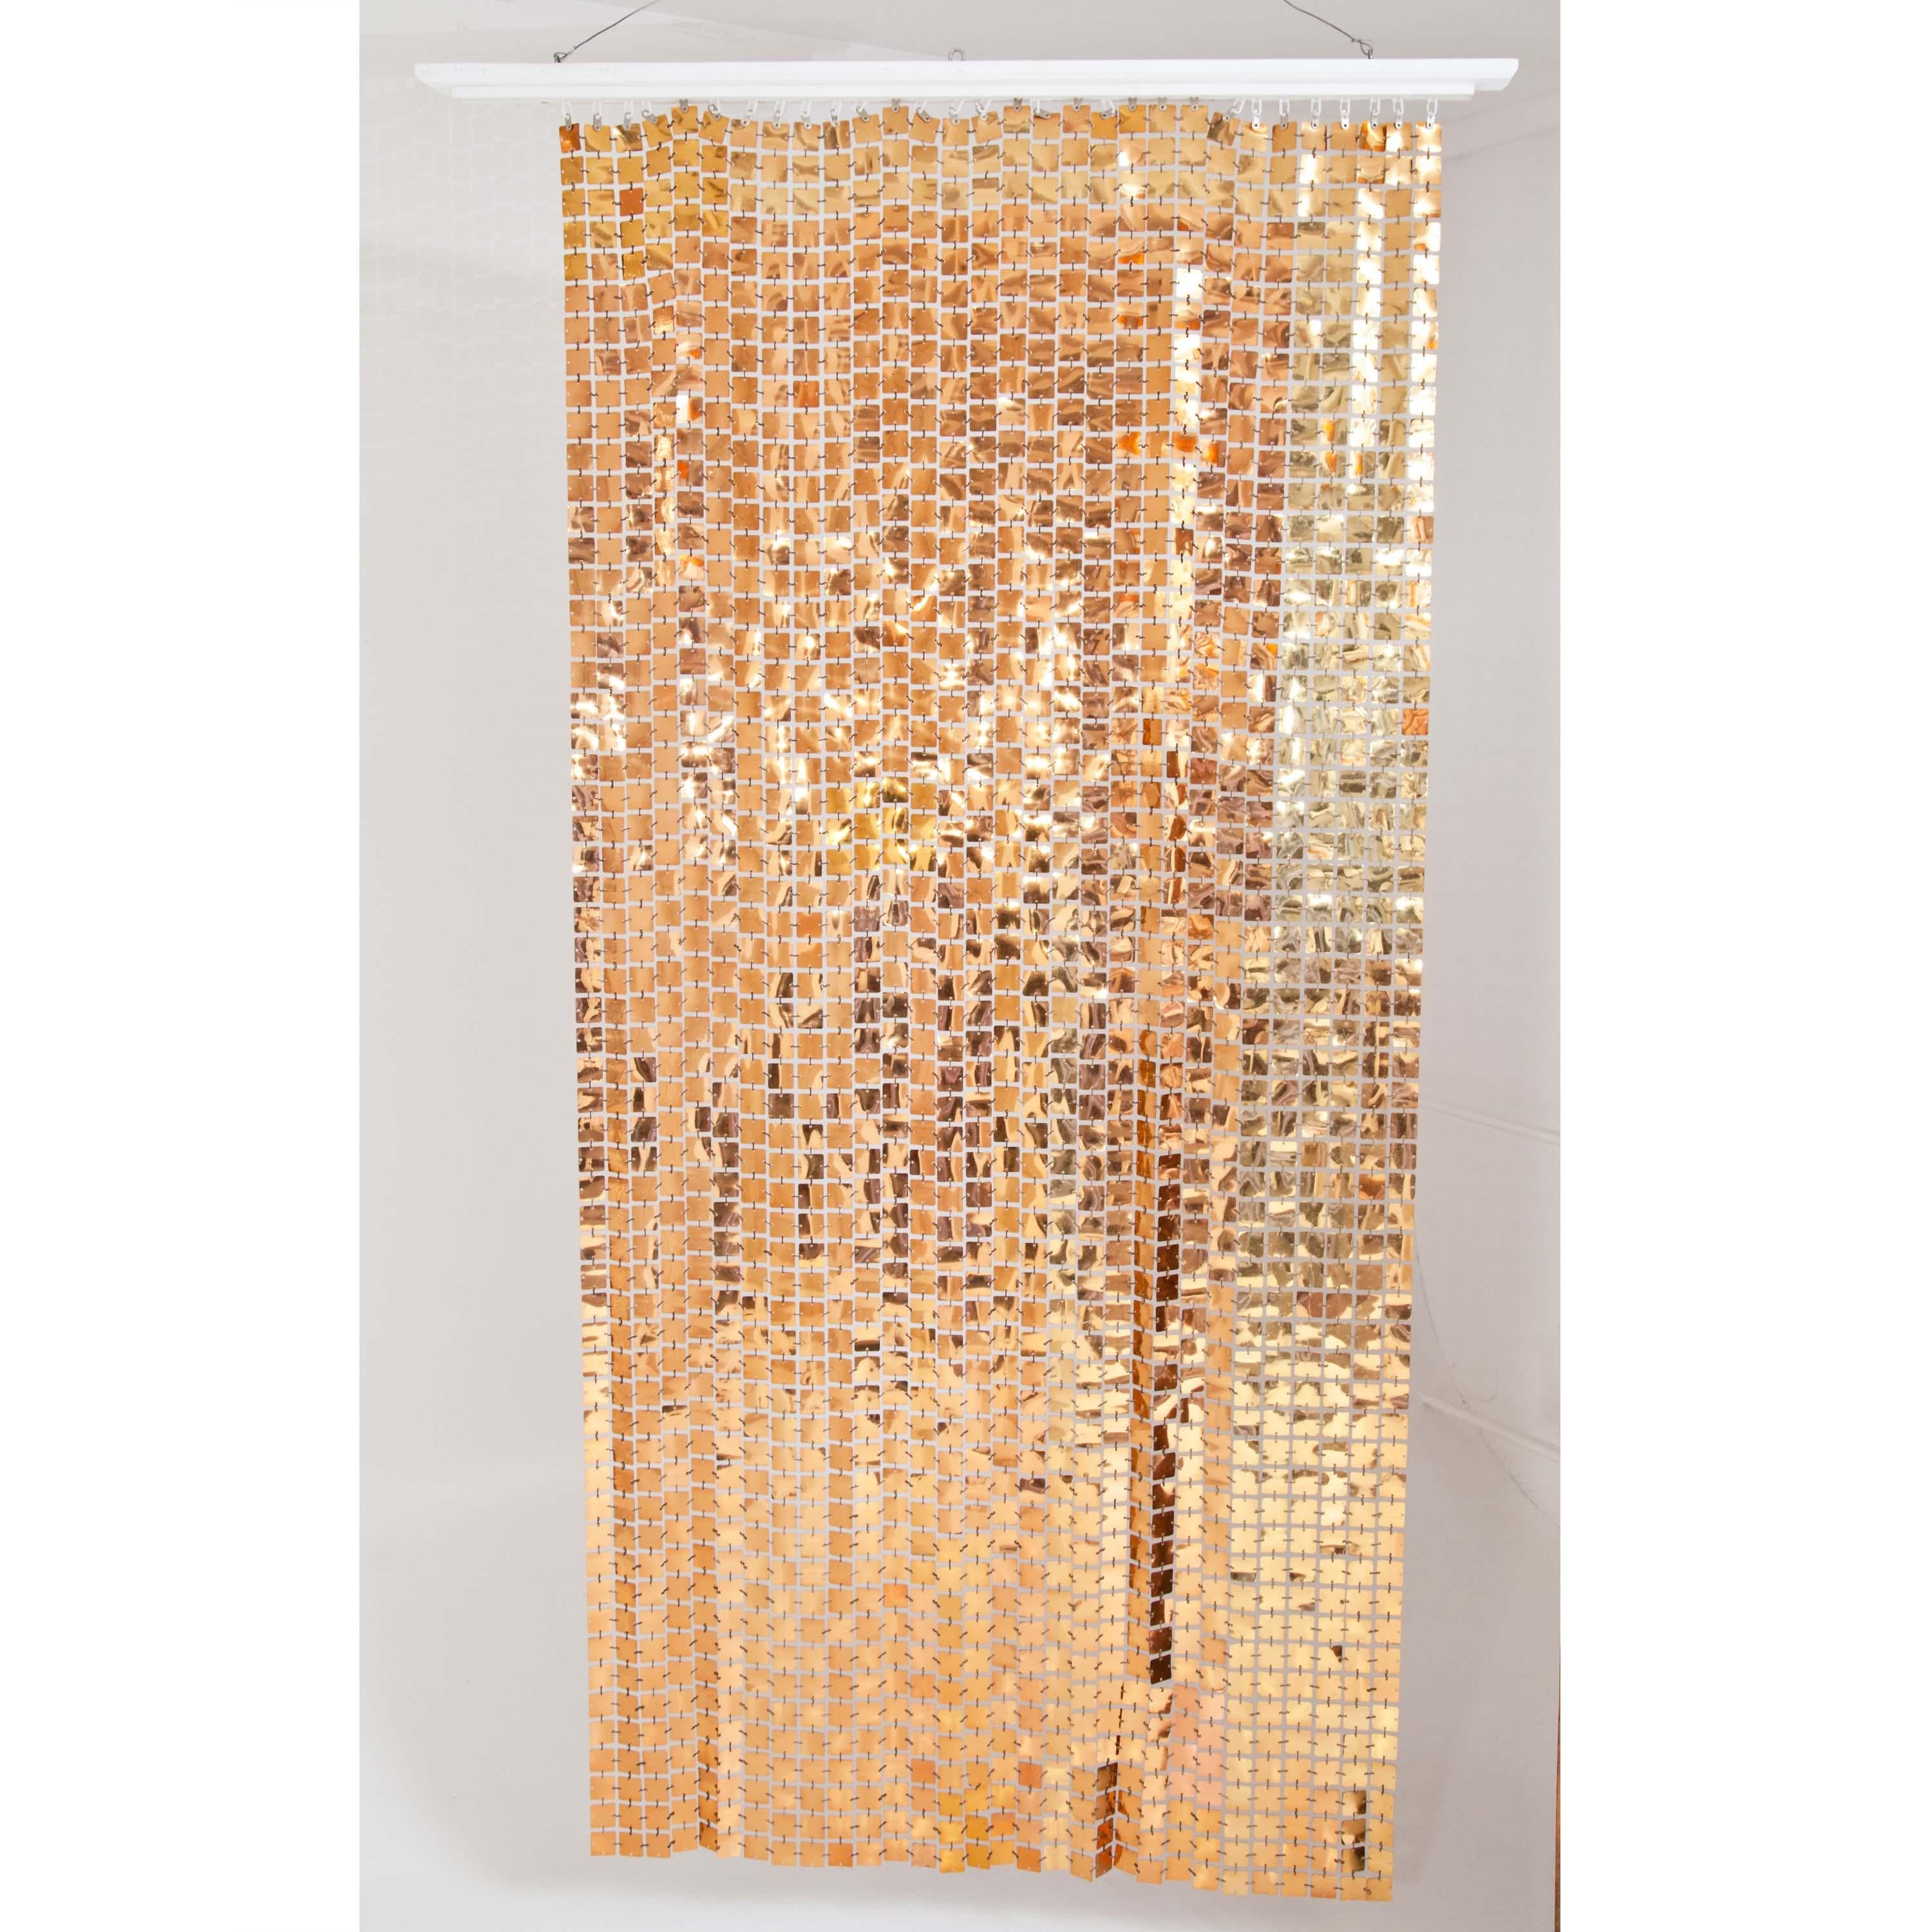 Pair of Paco Rabanne curtains made of thin metal plates in the style of his couture dresses from the 1960s. The squares are all each individually linked by small hooks.